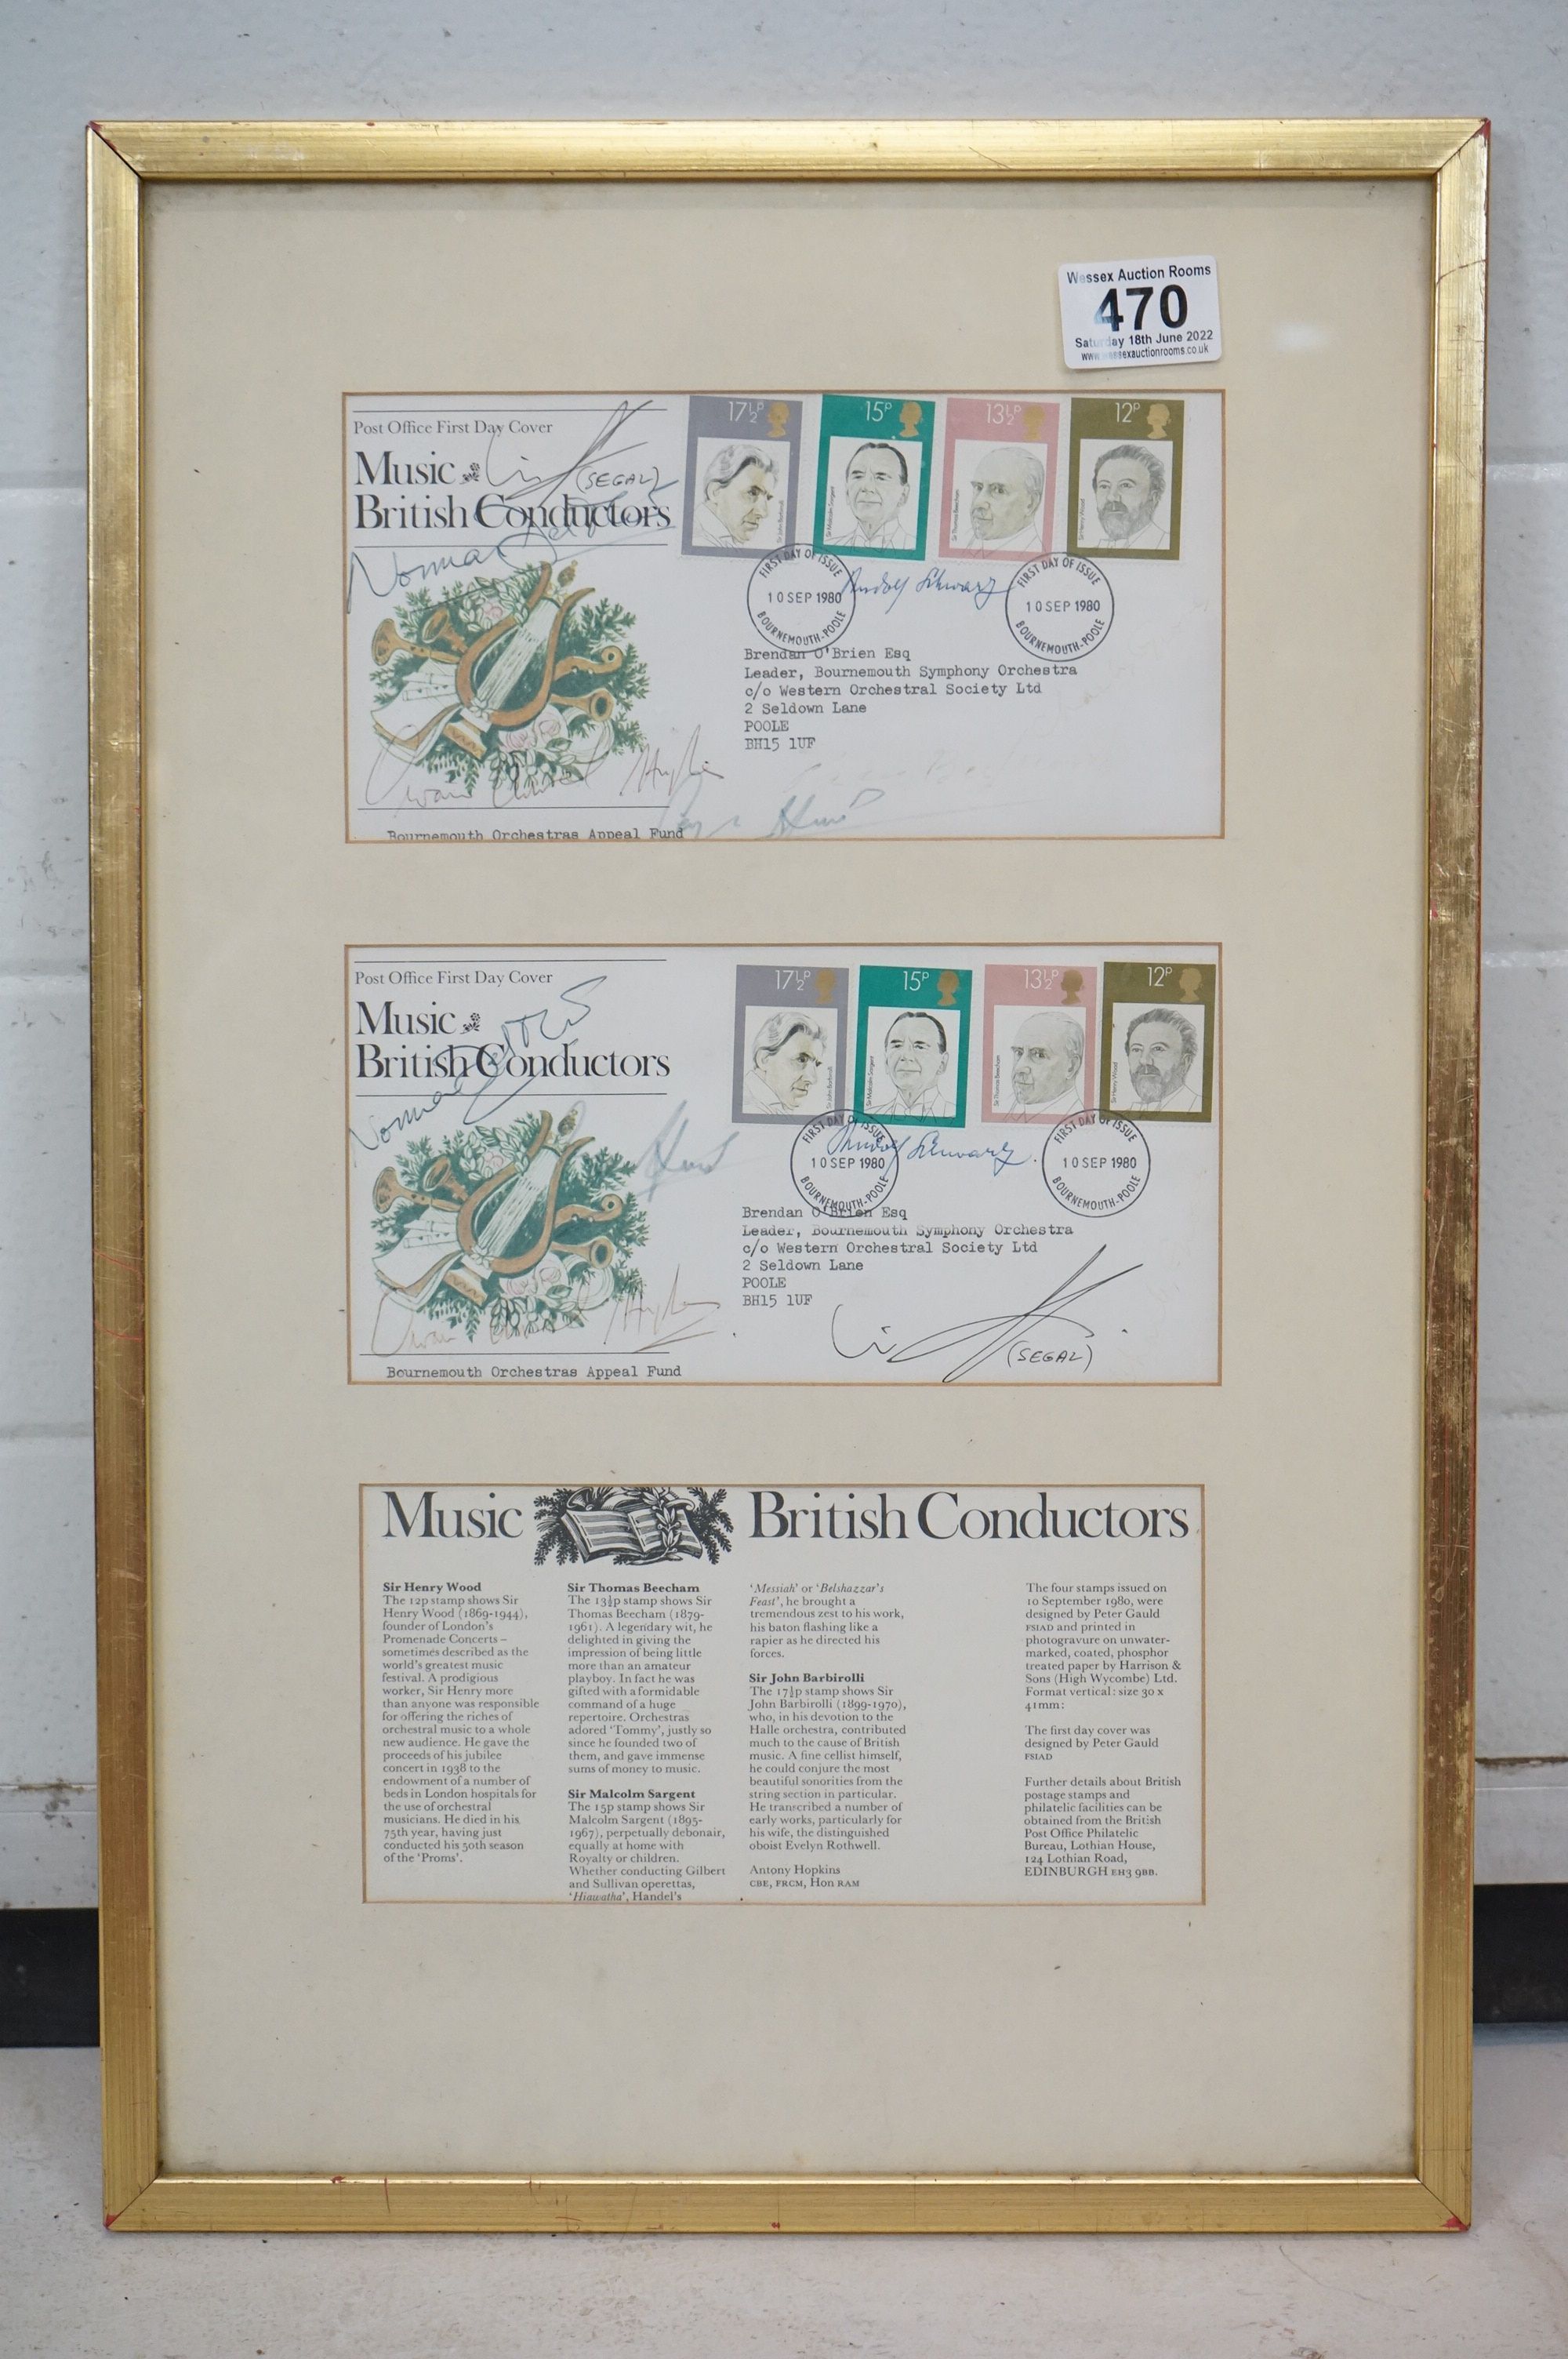 British Music Conductors 1980 stamps FDC x2, both with multiple signatures including Uri Segal who